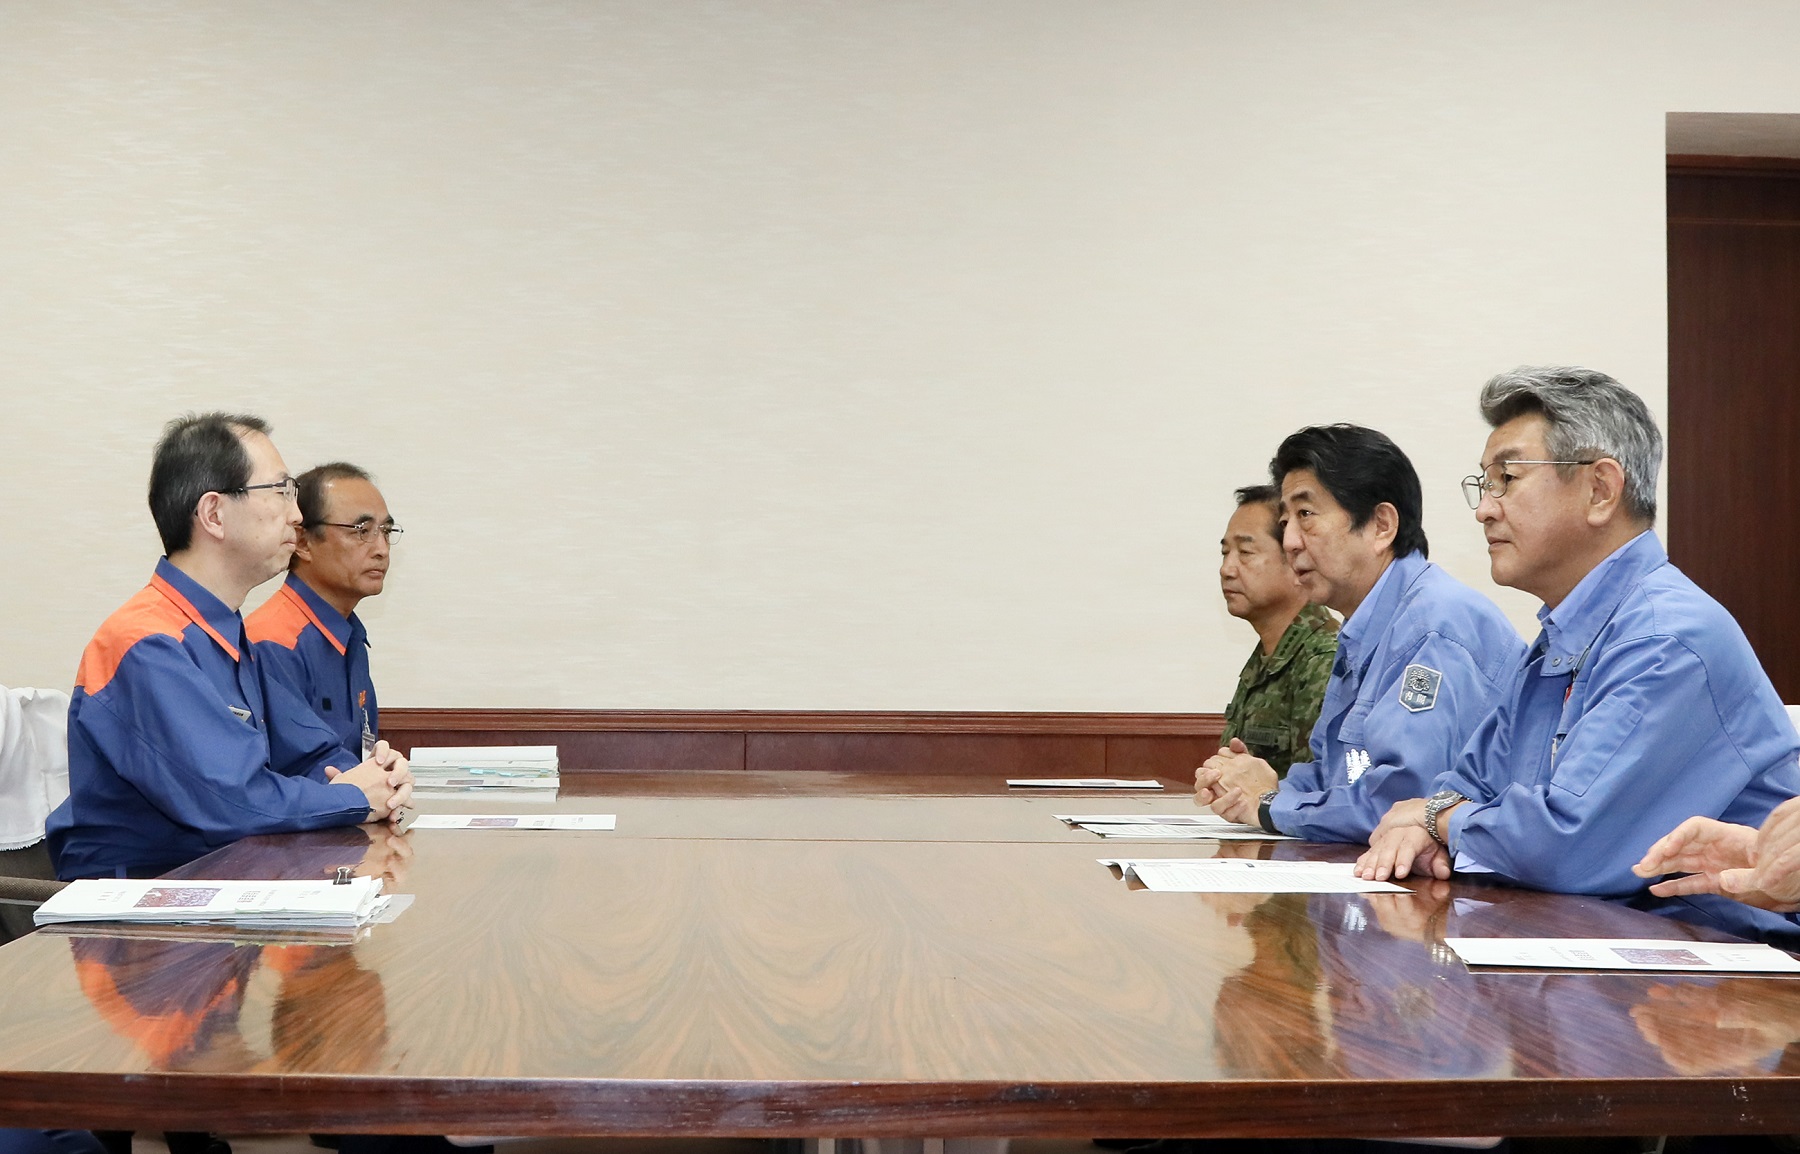 Photograph of an exchange of views with the Governor of Fukushima Prefecture